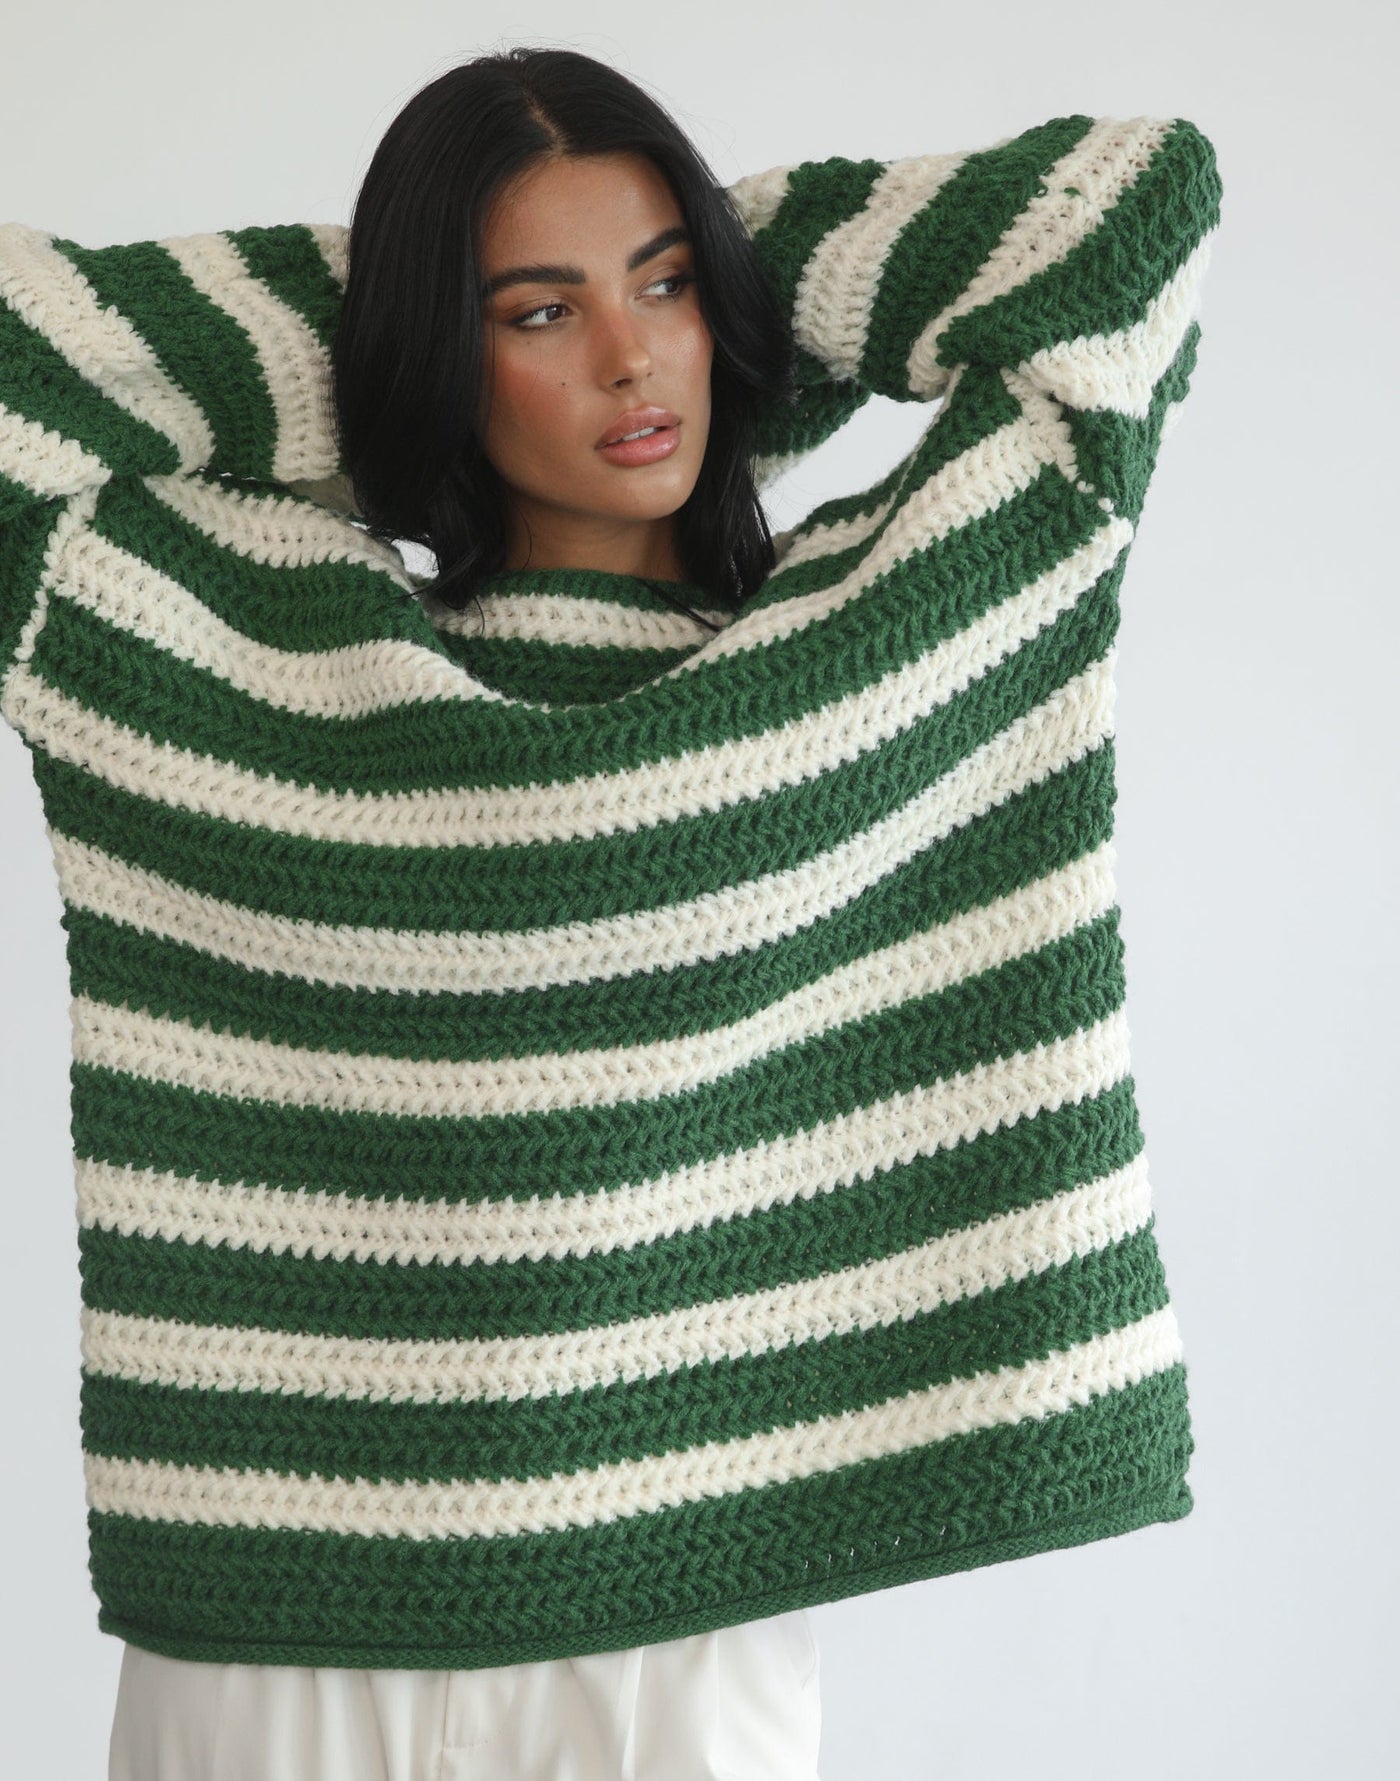 Everton Sweater (Green/Cream) - Striped Knit Sweater - Women's Outerwear - Charcoal Clothing